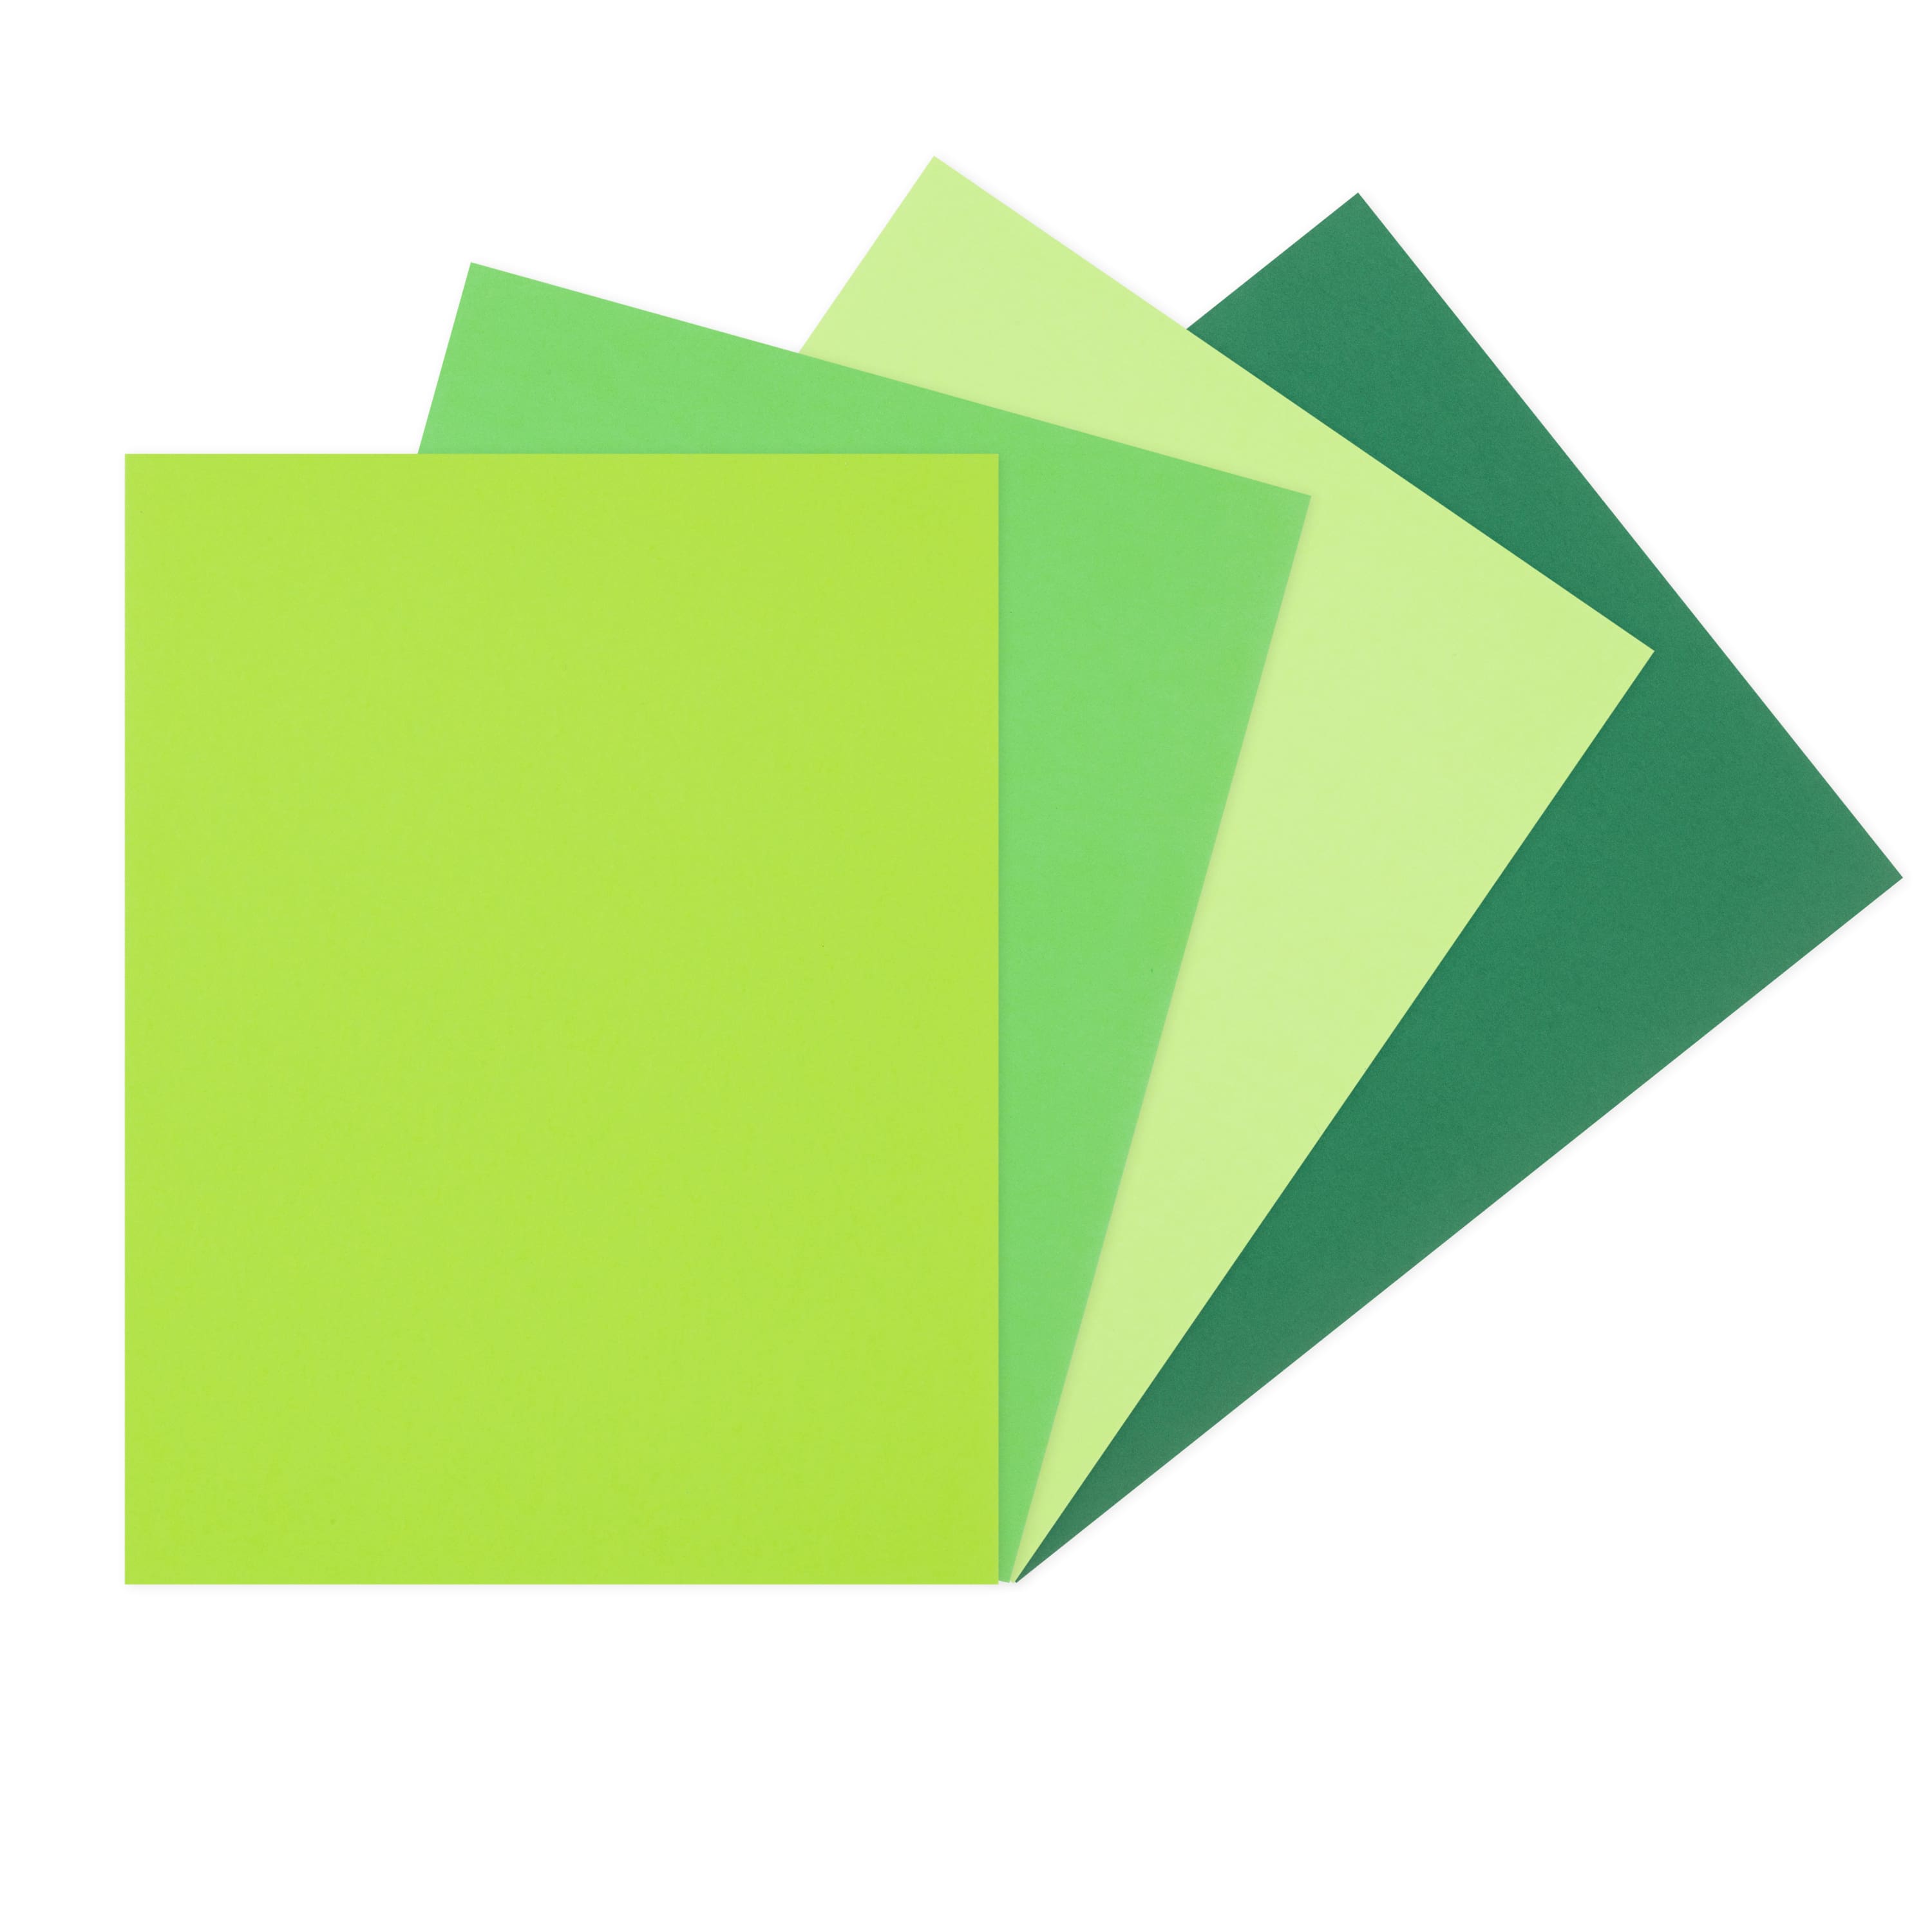 Feathered Greens 8.5 x 11 Cardstock Paper by Recollections®, 50 Sheets